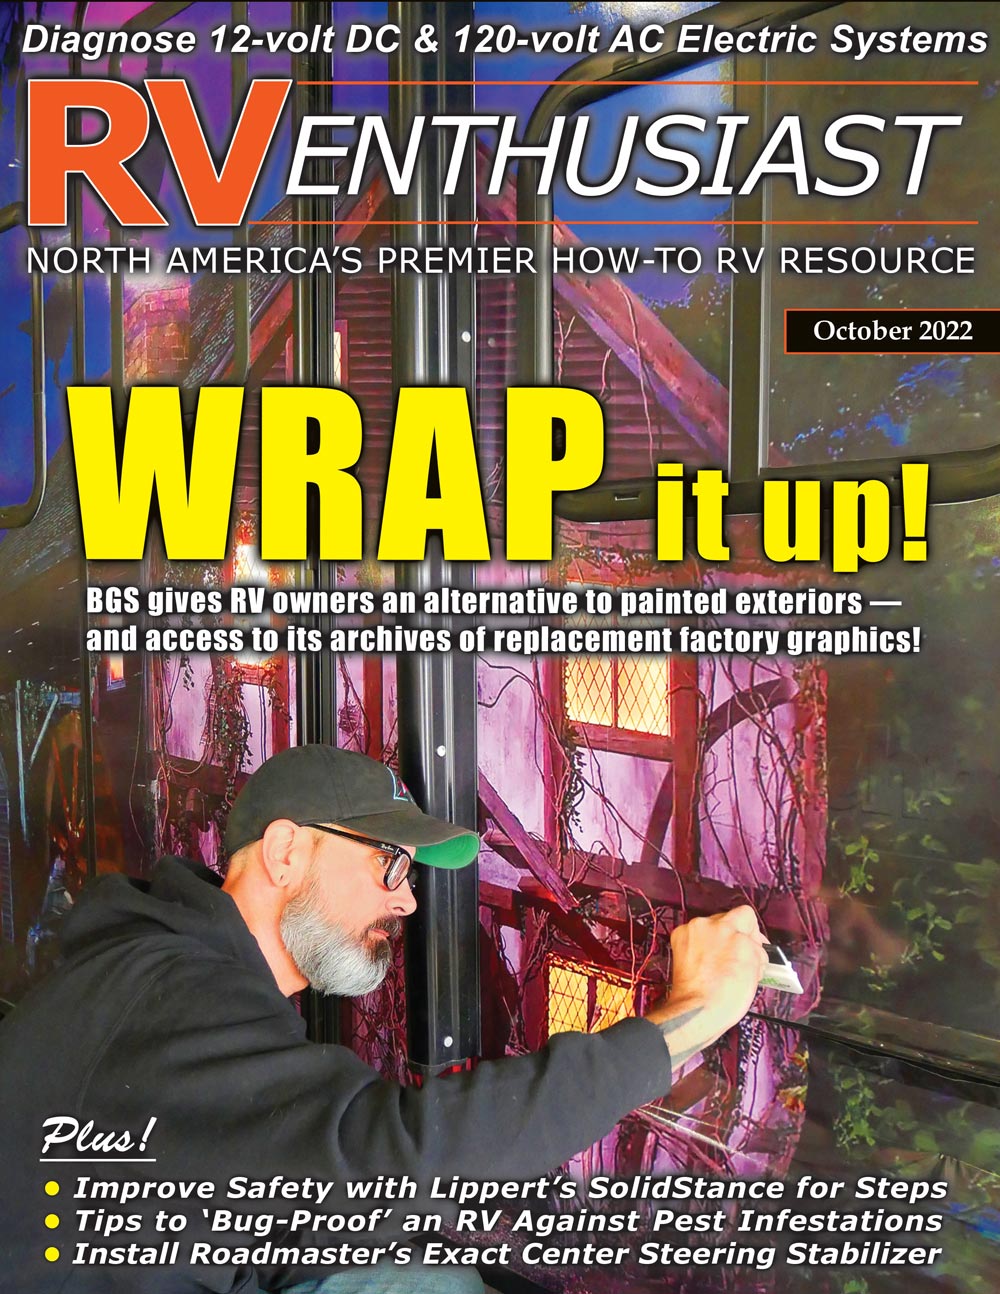 October Issue of ‘RV Enthusiast’ Looks at Full-Body Wraps